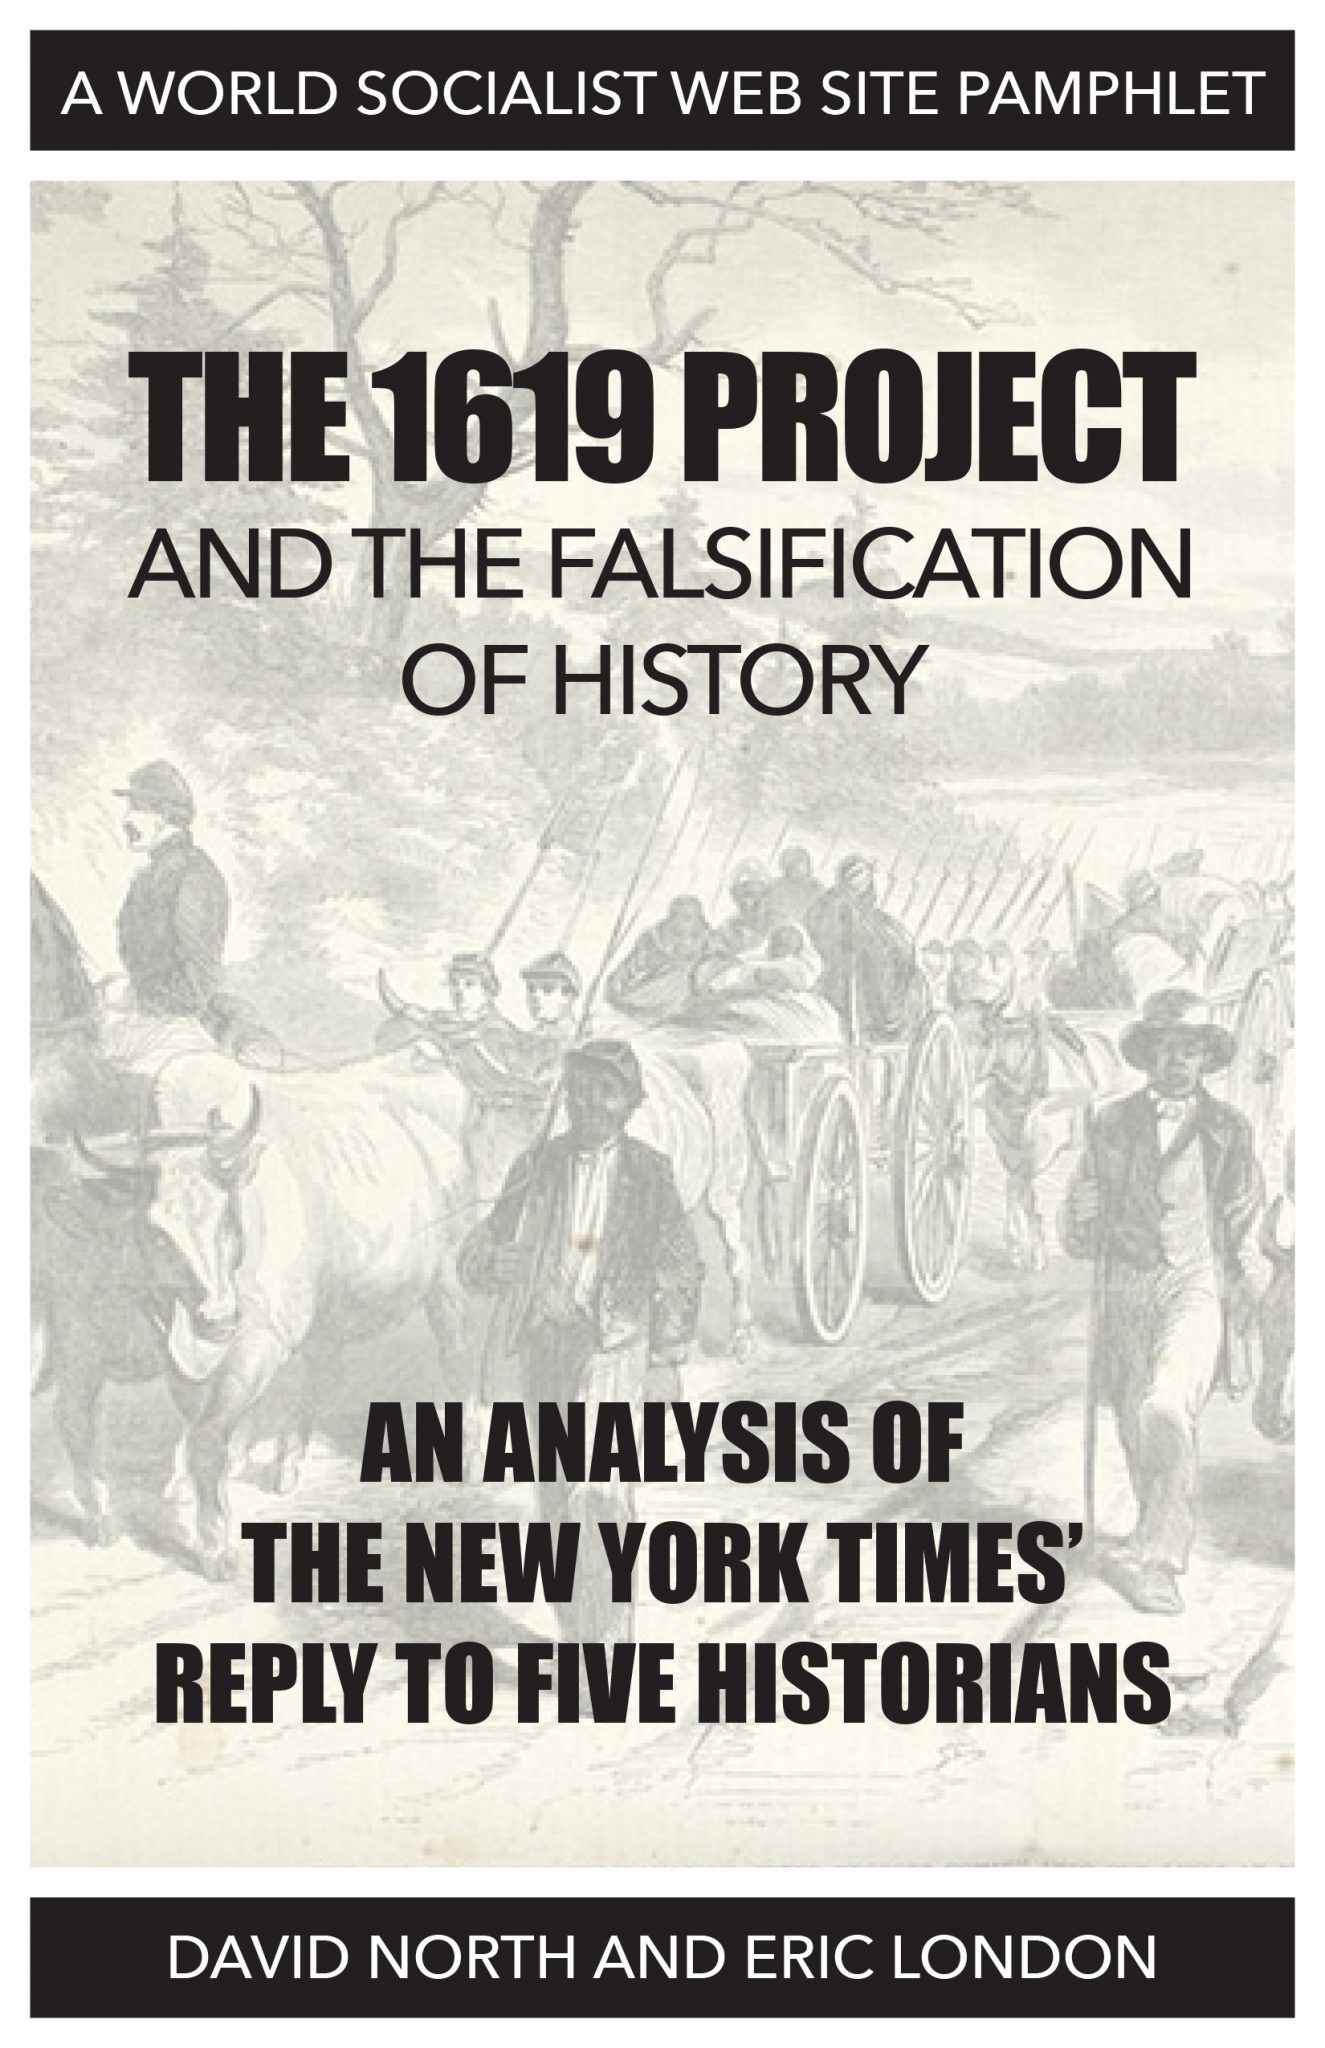 1619 project the book